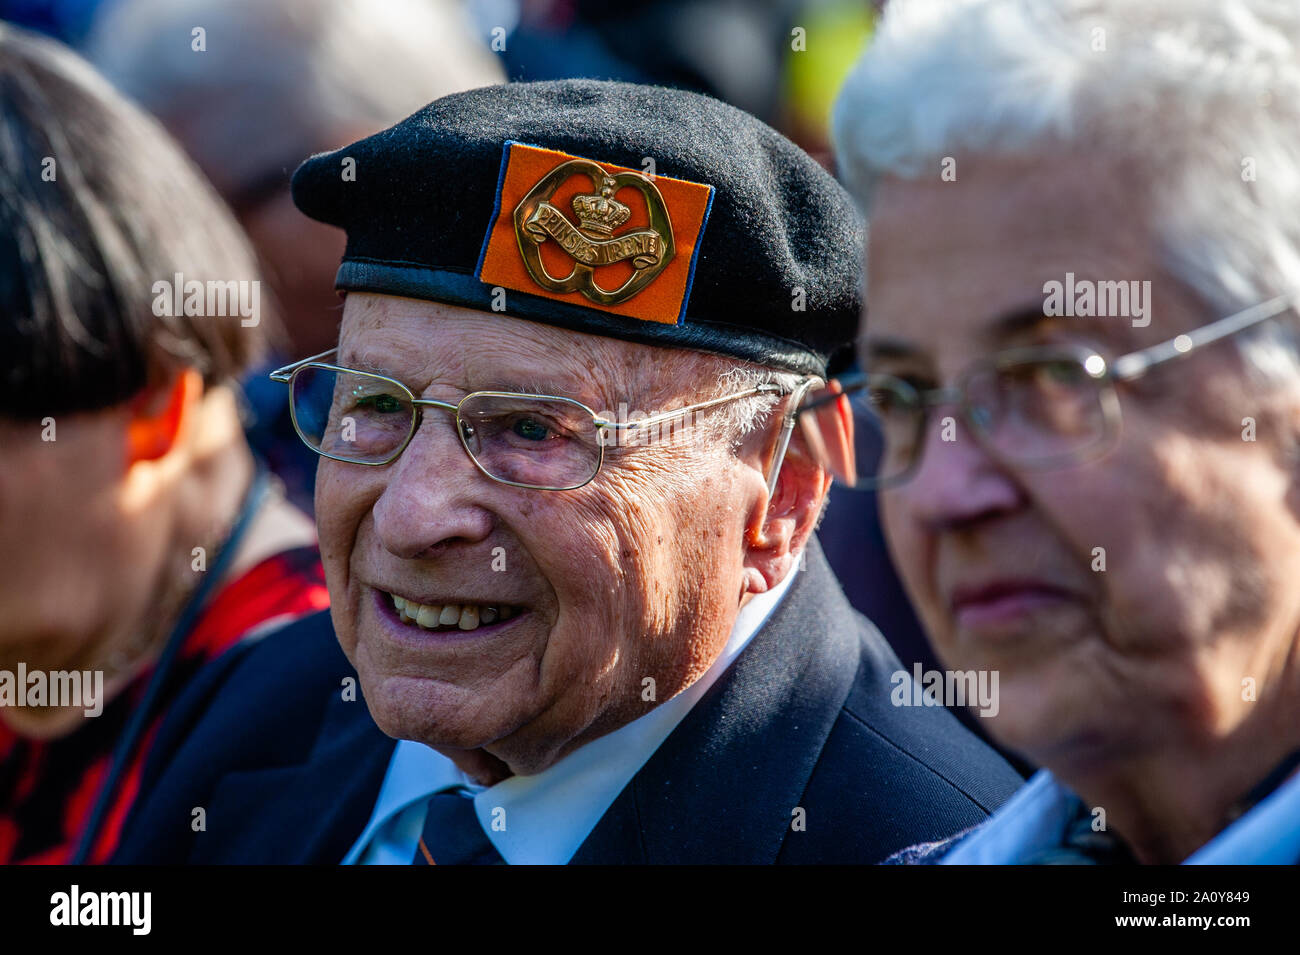 A war veteran smiling during the commemoration.At the Arnhem Oosterbeek War Cemetery, more than 1750 Allied soldiers were buried. As part of the commemorations for the 75th anniversary of Operation Market Garden, a memorial service was held in the presence of veterans, their relatives and thousands of people. A white stone arch was placed at each grave. On the field of honor is a 'Cross of sacrifice' made of Portland stone, on which a bronze sword is attached. Stock Photo